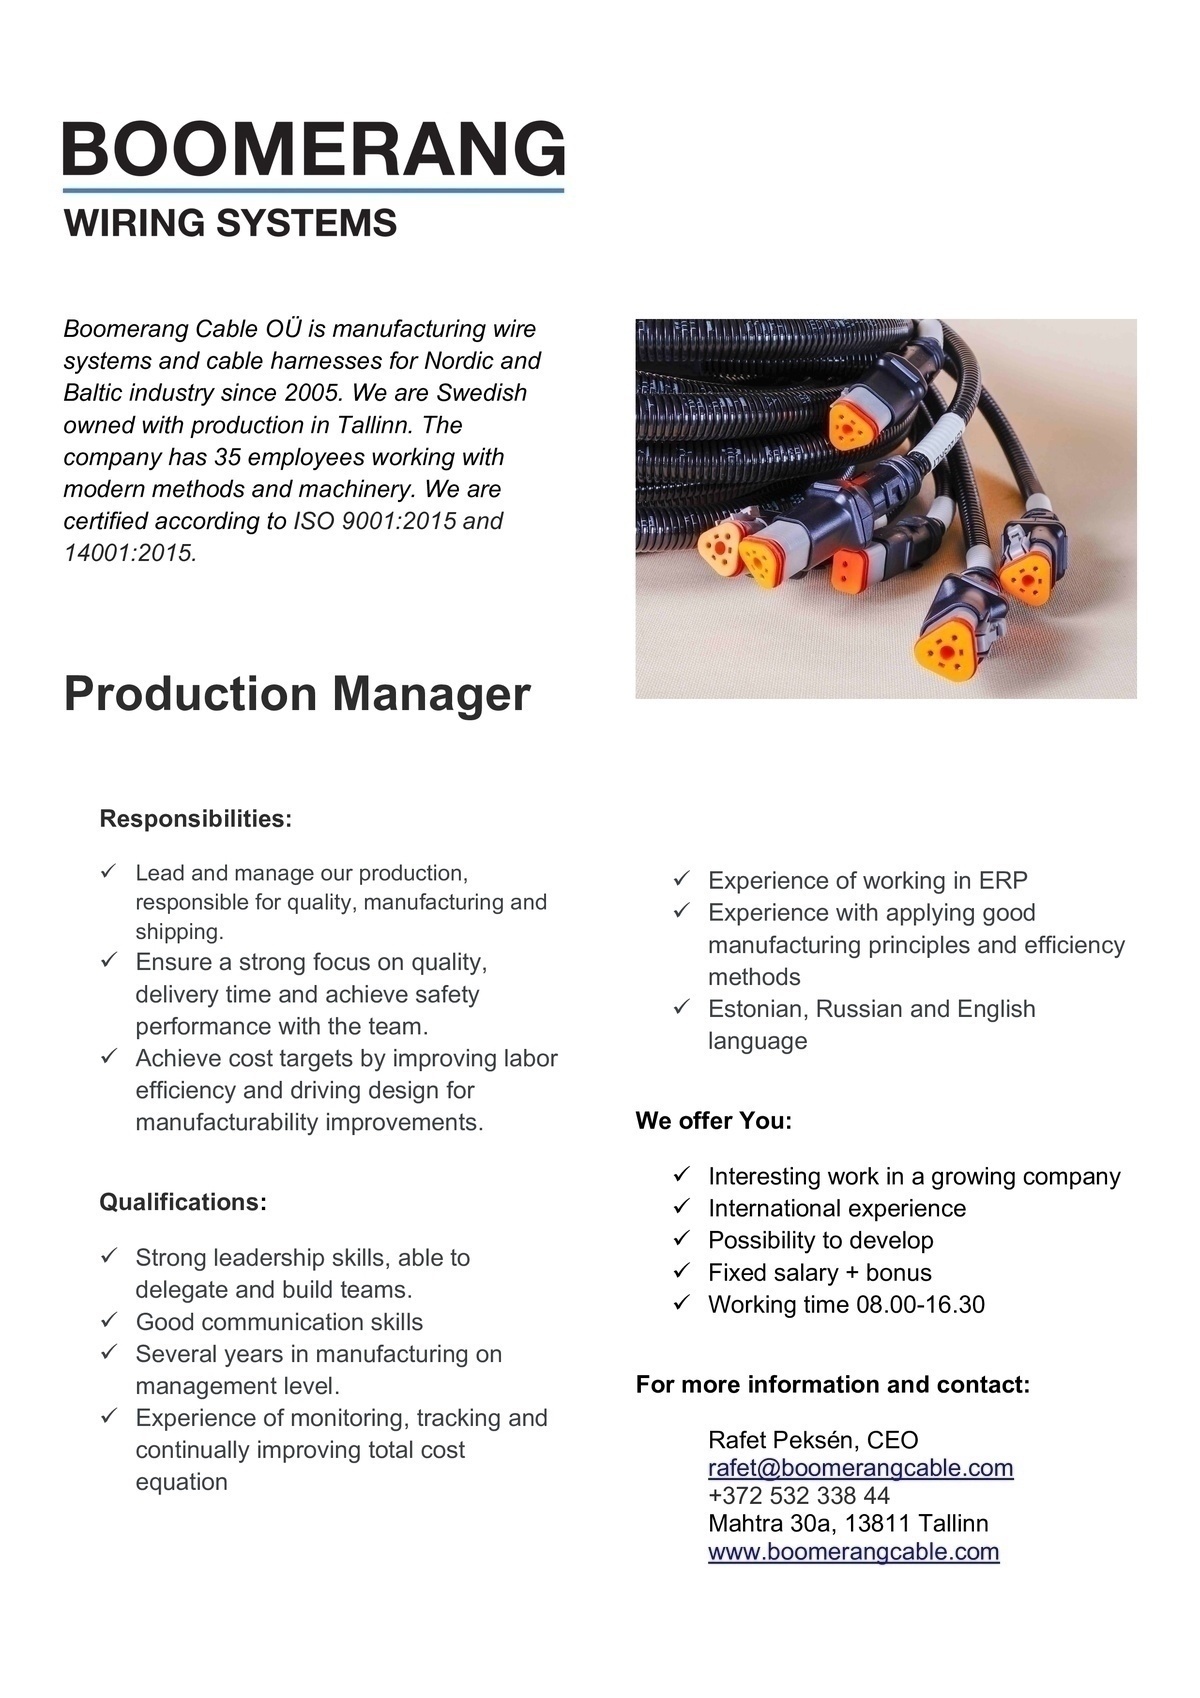 BOOMERANG CABLE OÜ Production Manager